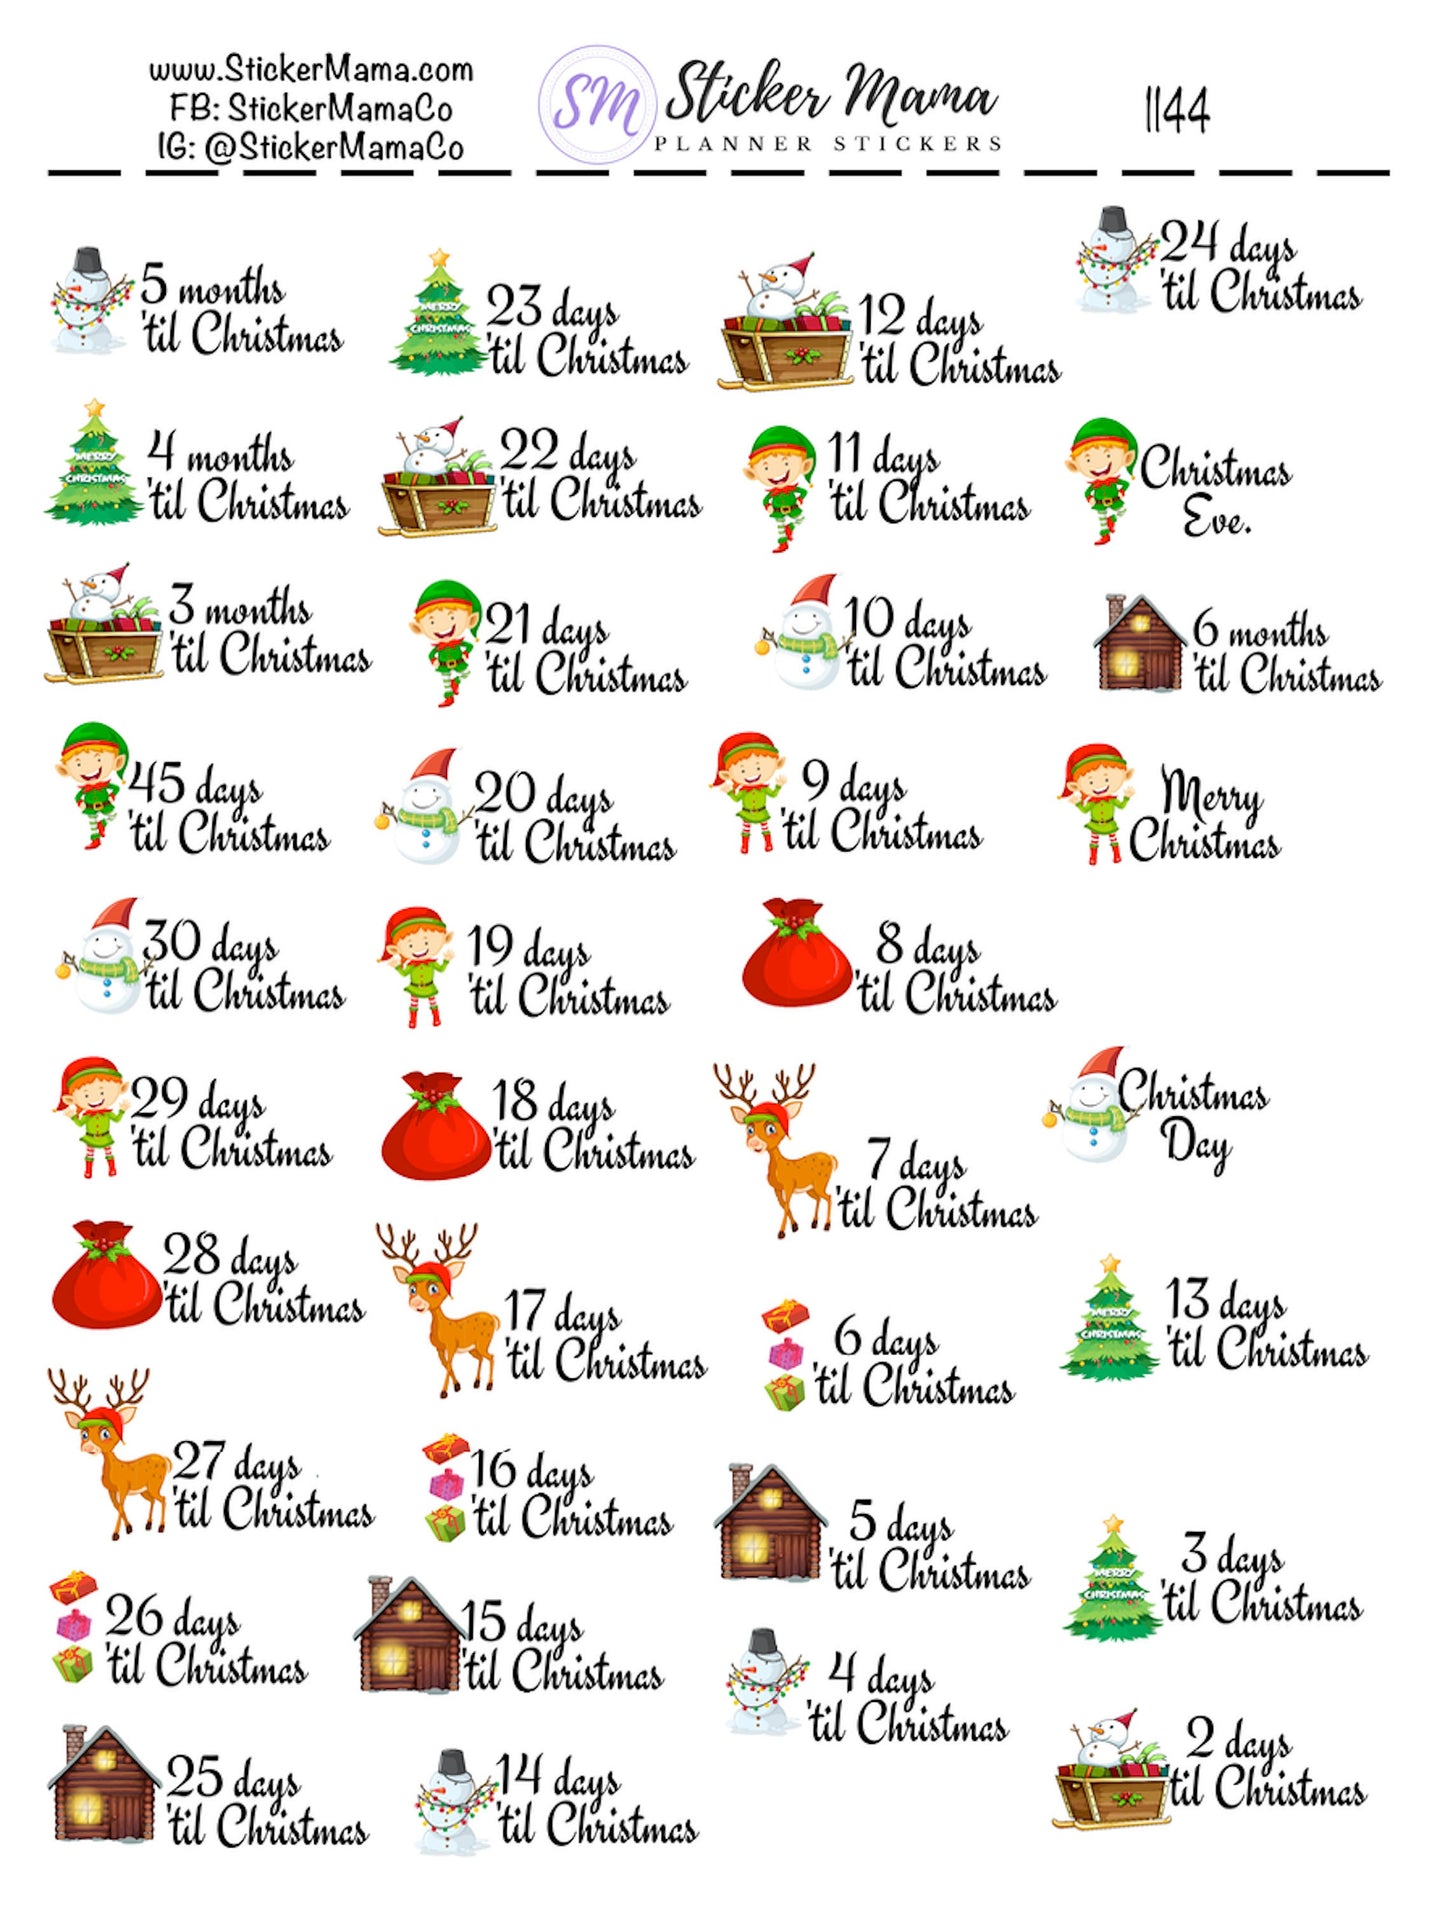 1144 - CHRISTMAS COUNTDOWN STICKERS - Christmas Stickers - Planner Stickers